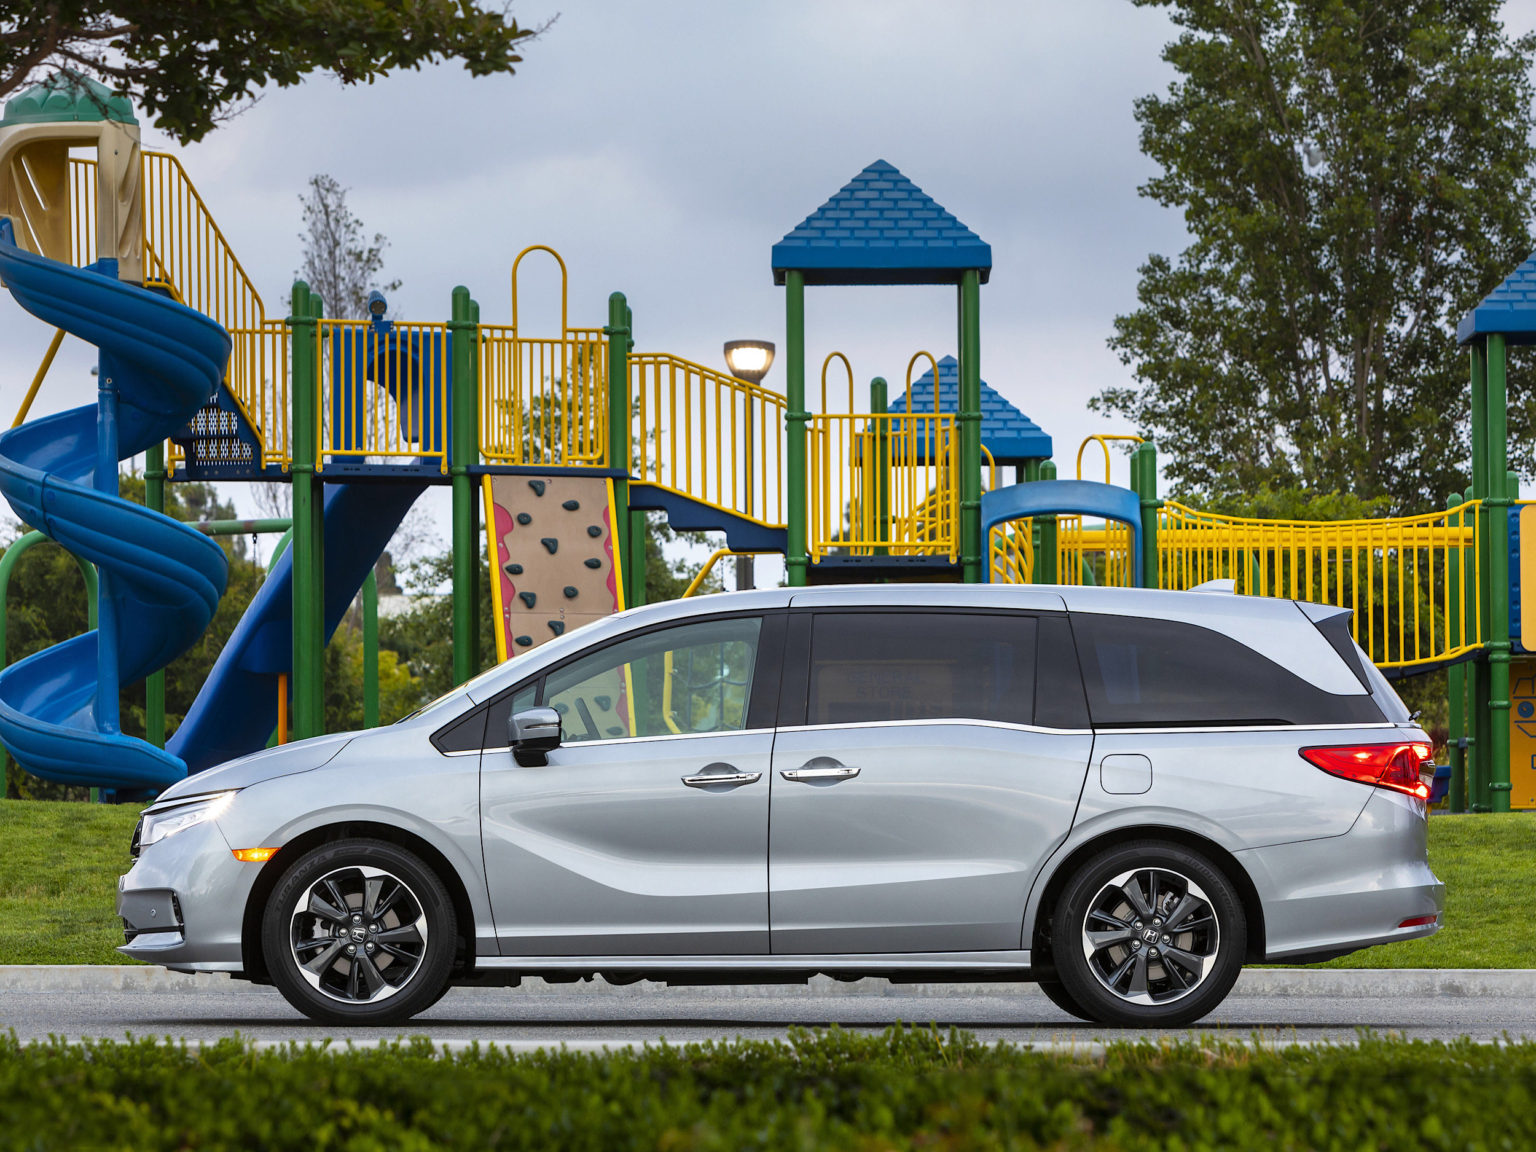 The Honda Odyssey took top honors in the Minivan category.